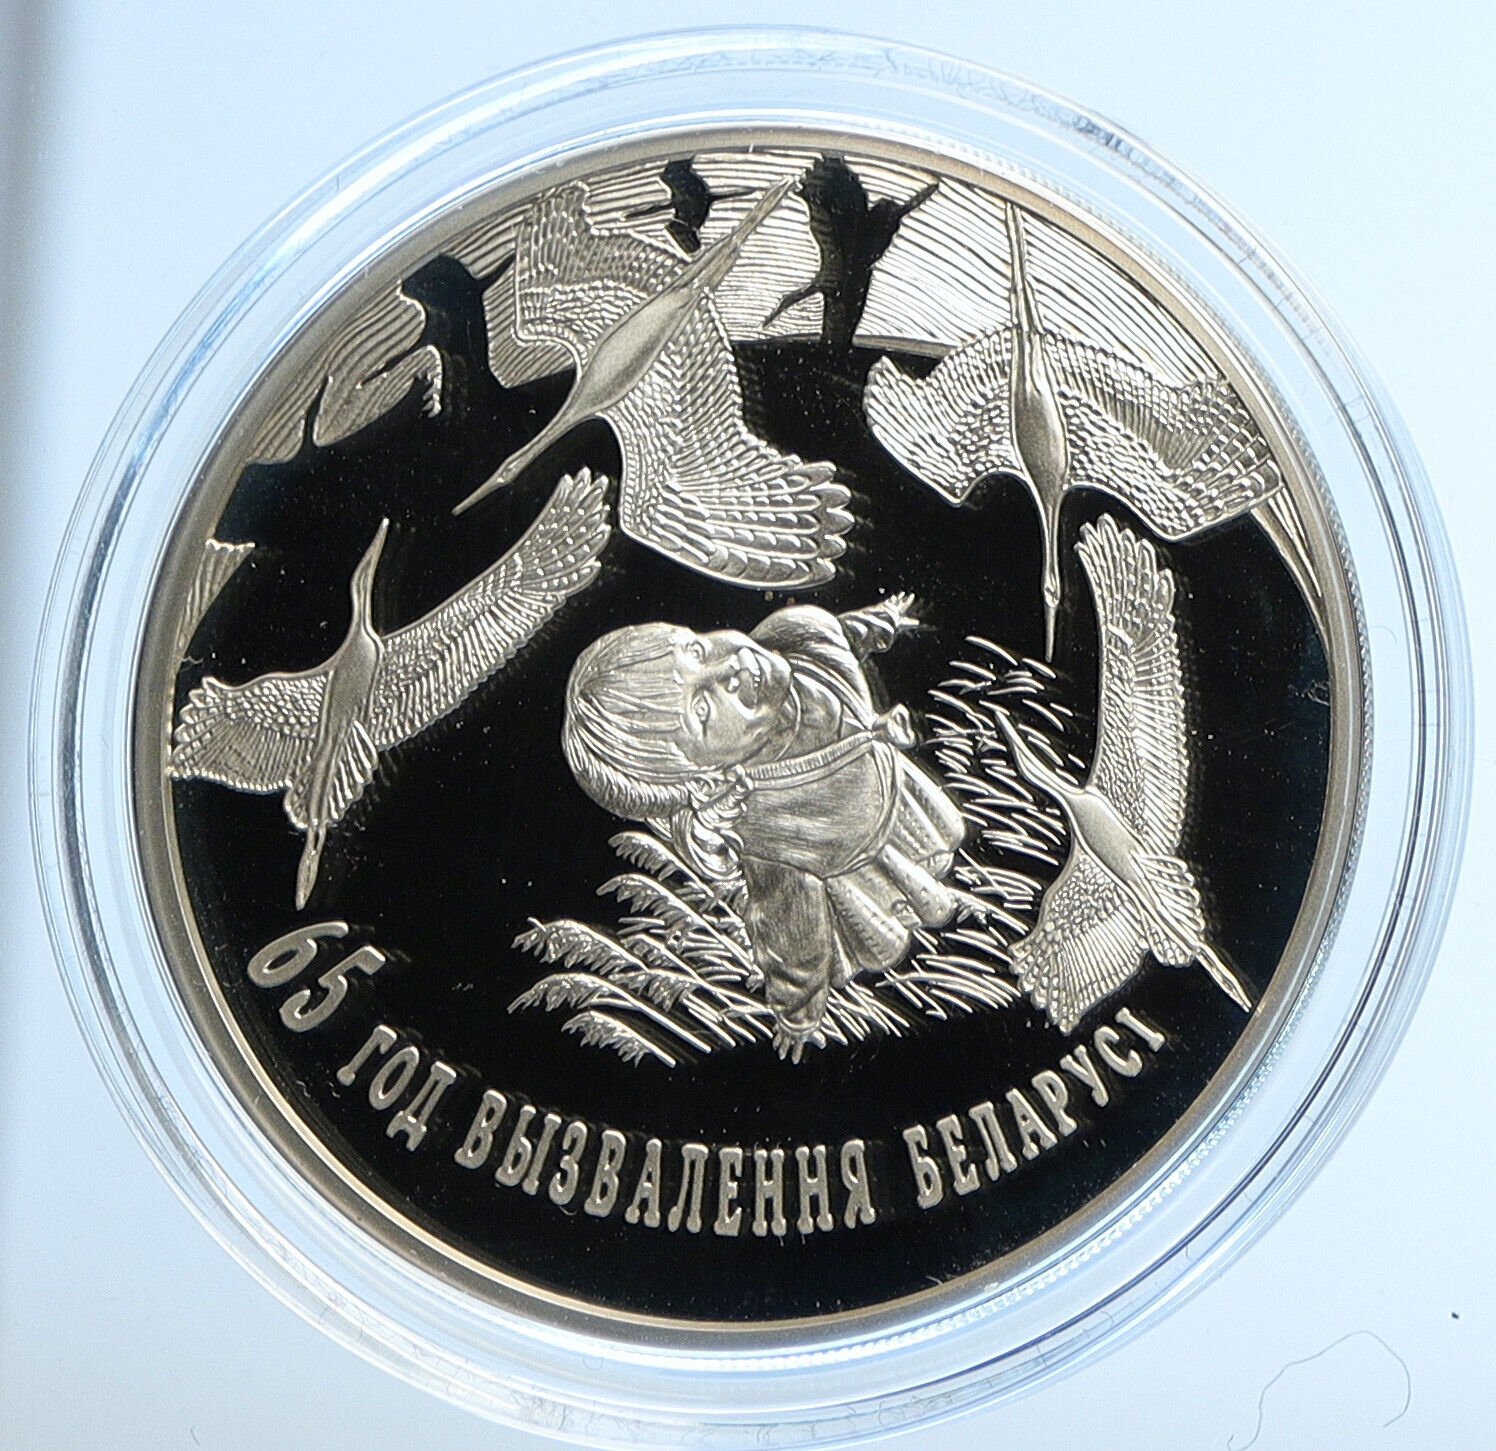 2009 BELARUS Birds NATIONAL ACADEMY SCIENCES Proof Silver 20 Rubles Coin i112872